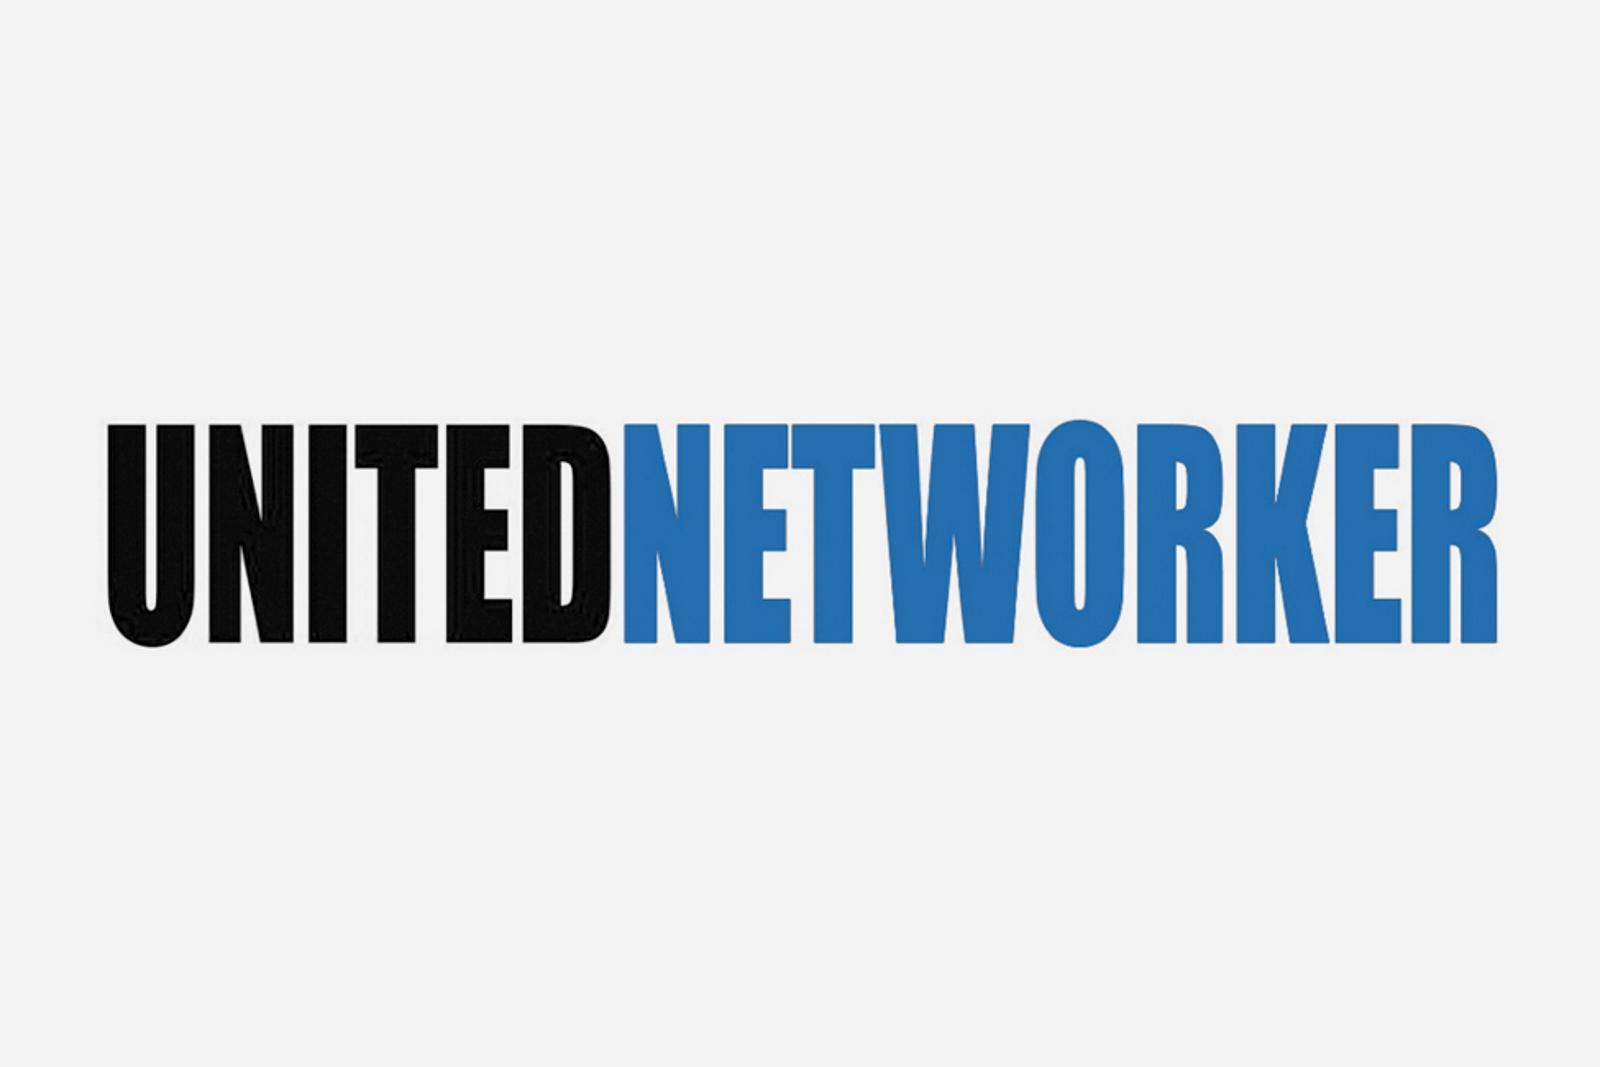 United Networker